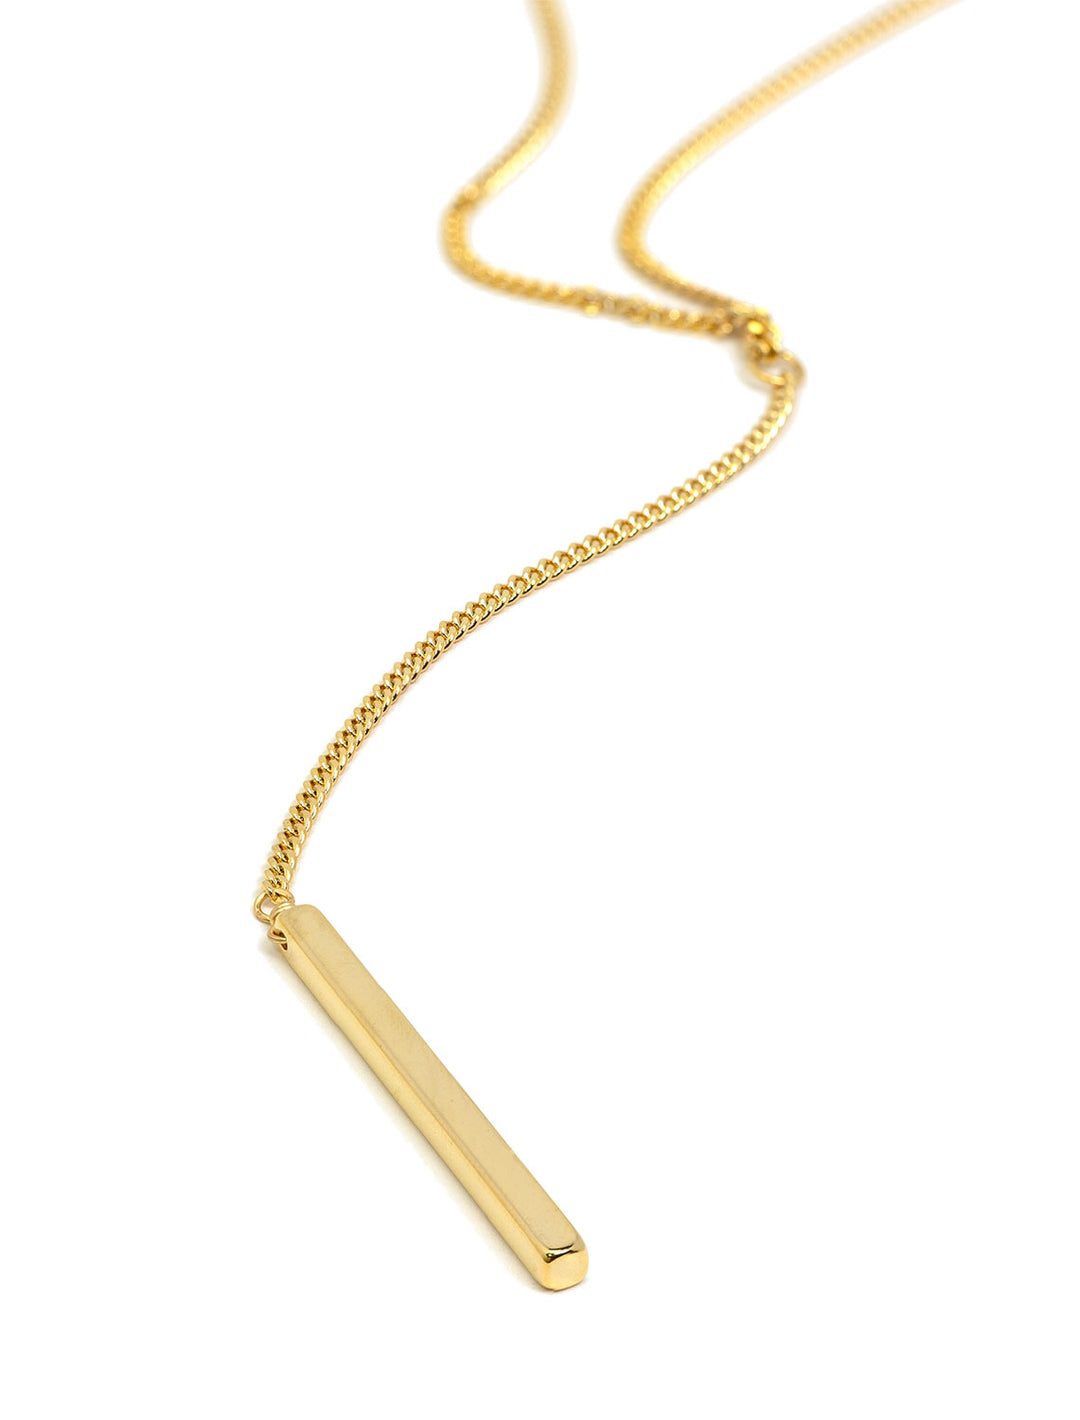 Stylized laydown of AV Max's long y bar chain necklace in gold.